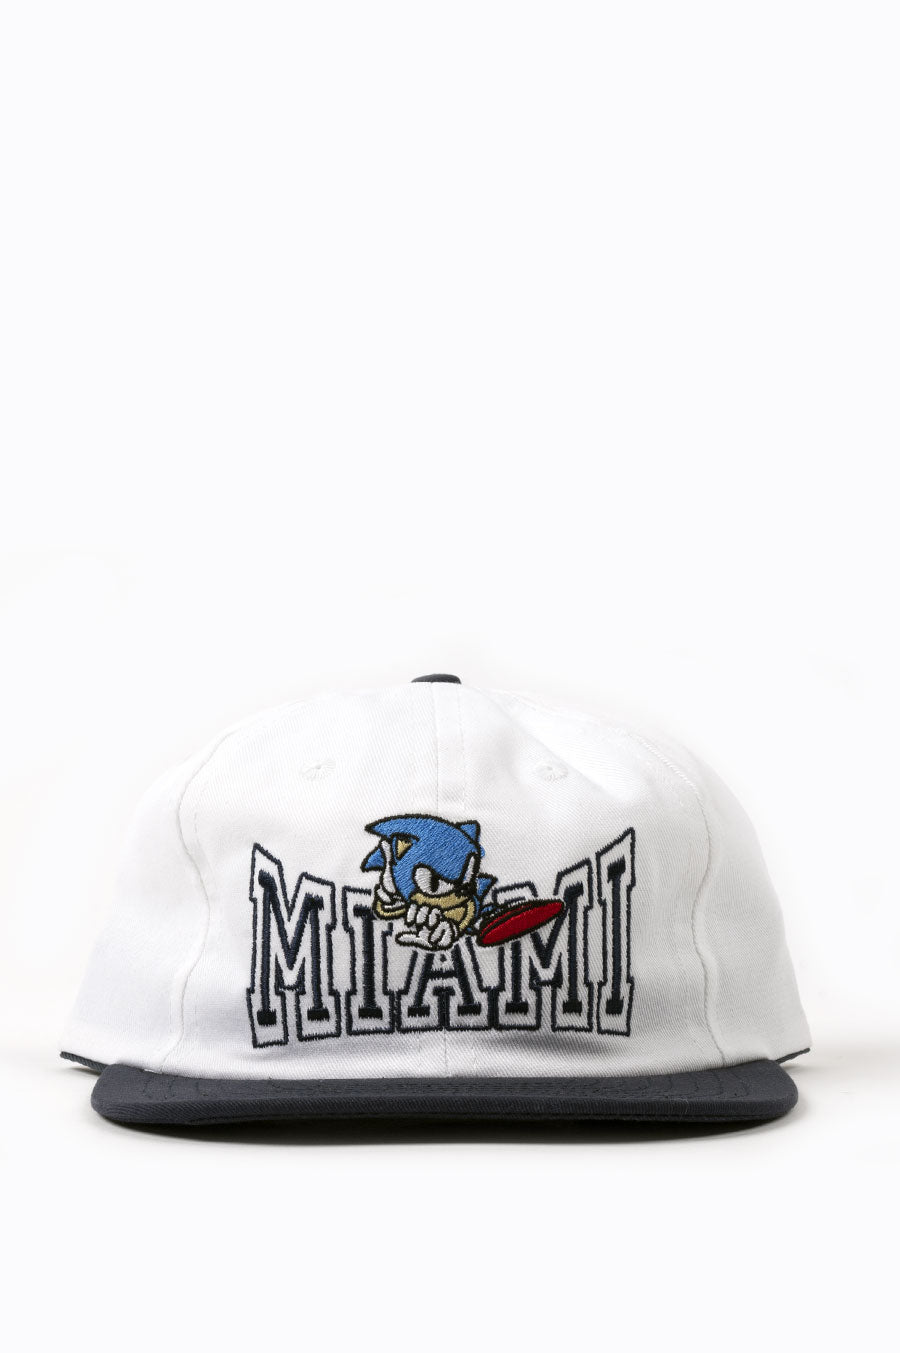 STRAY RATS X SONIC THE HEDGEHOG MIAMI HAT WHITE